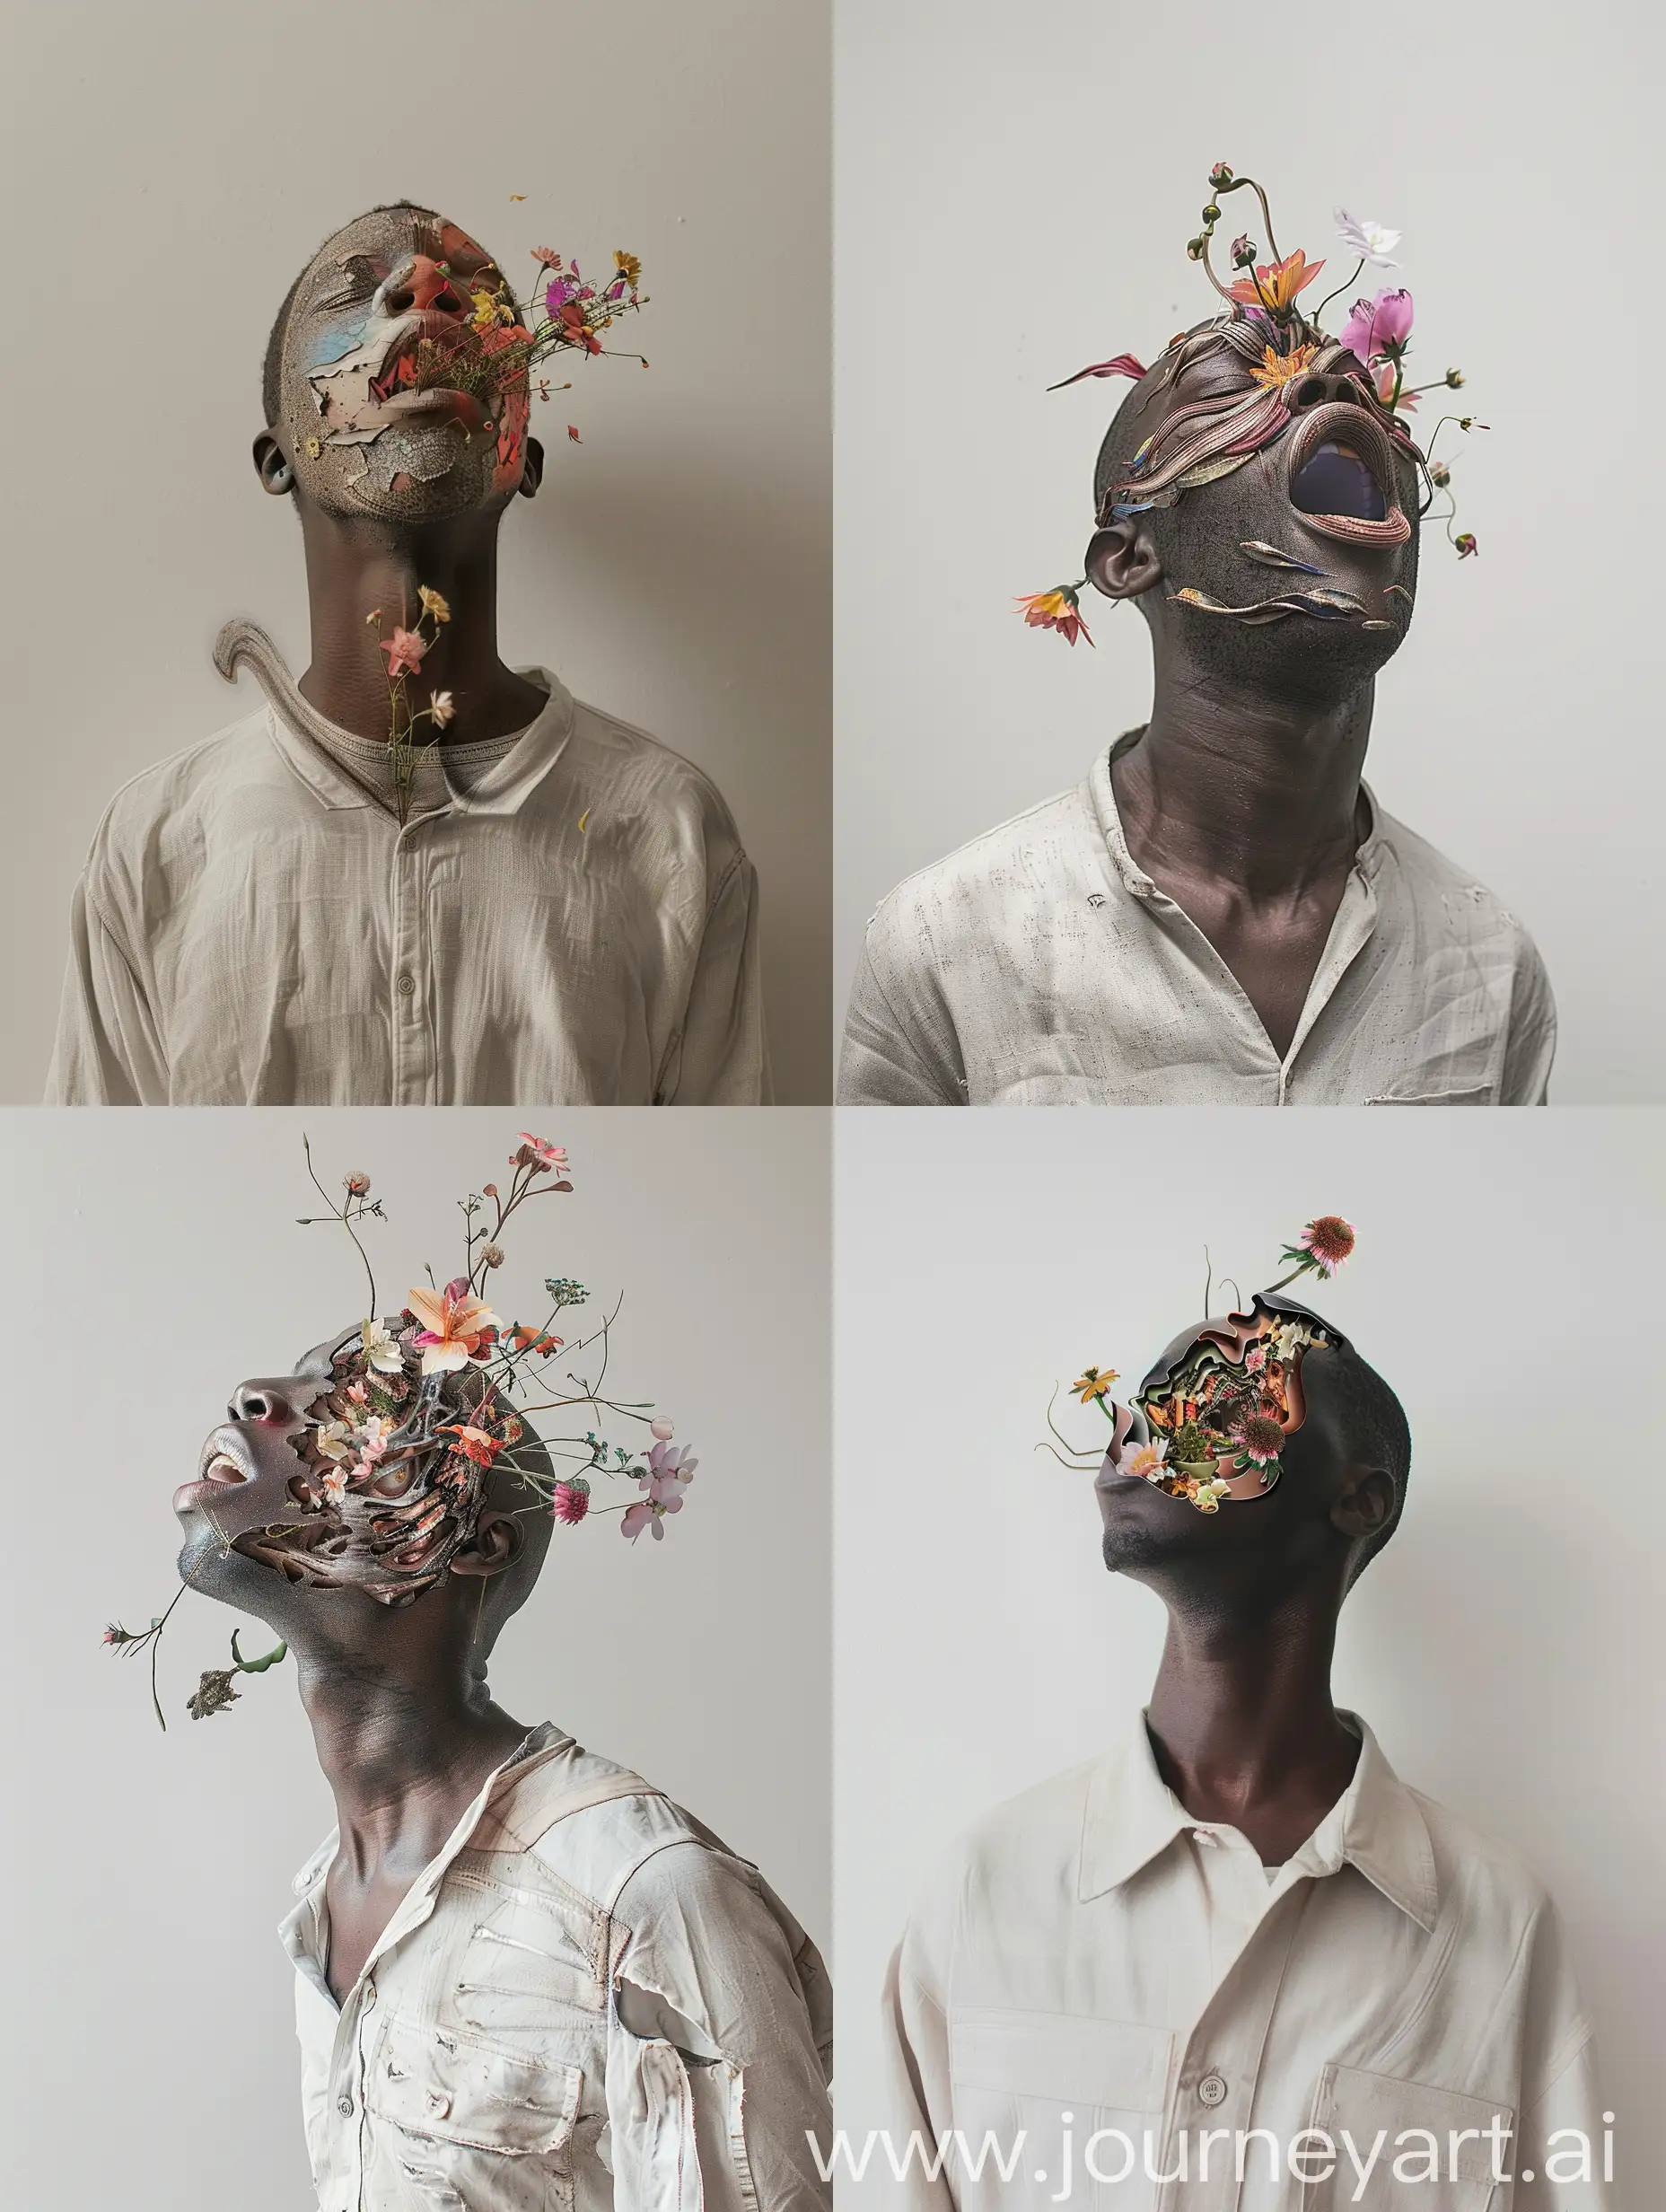  a  white wall background capturing a lo-fi striking African male with their clothes in a  abstracting appearance, figure with its neck slightly tilted up and it's head looking up in a dramatic pose showing,the figure has a flat open head with flowers coming out of it, The face is composed of multiple layers and textures, giving it a unique and vortex swirling tornado appearance on the mouth. Creating non-representational images with shapes, colors, and textures,